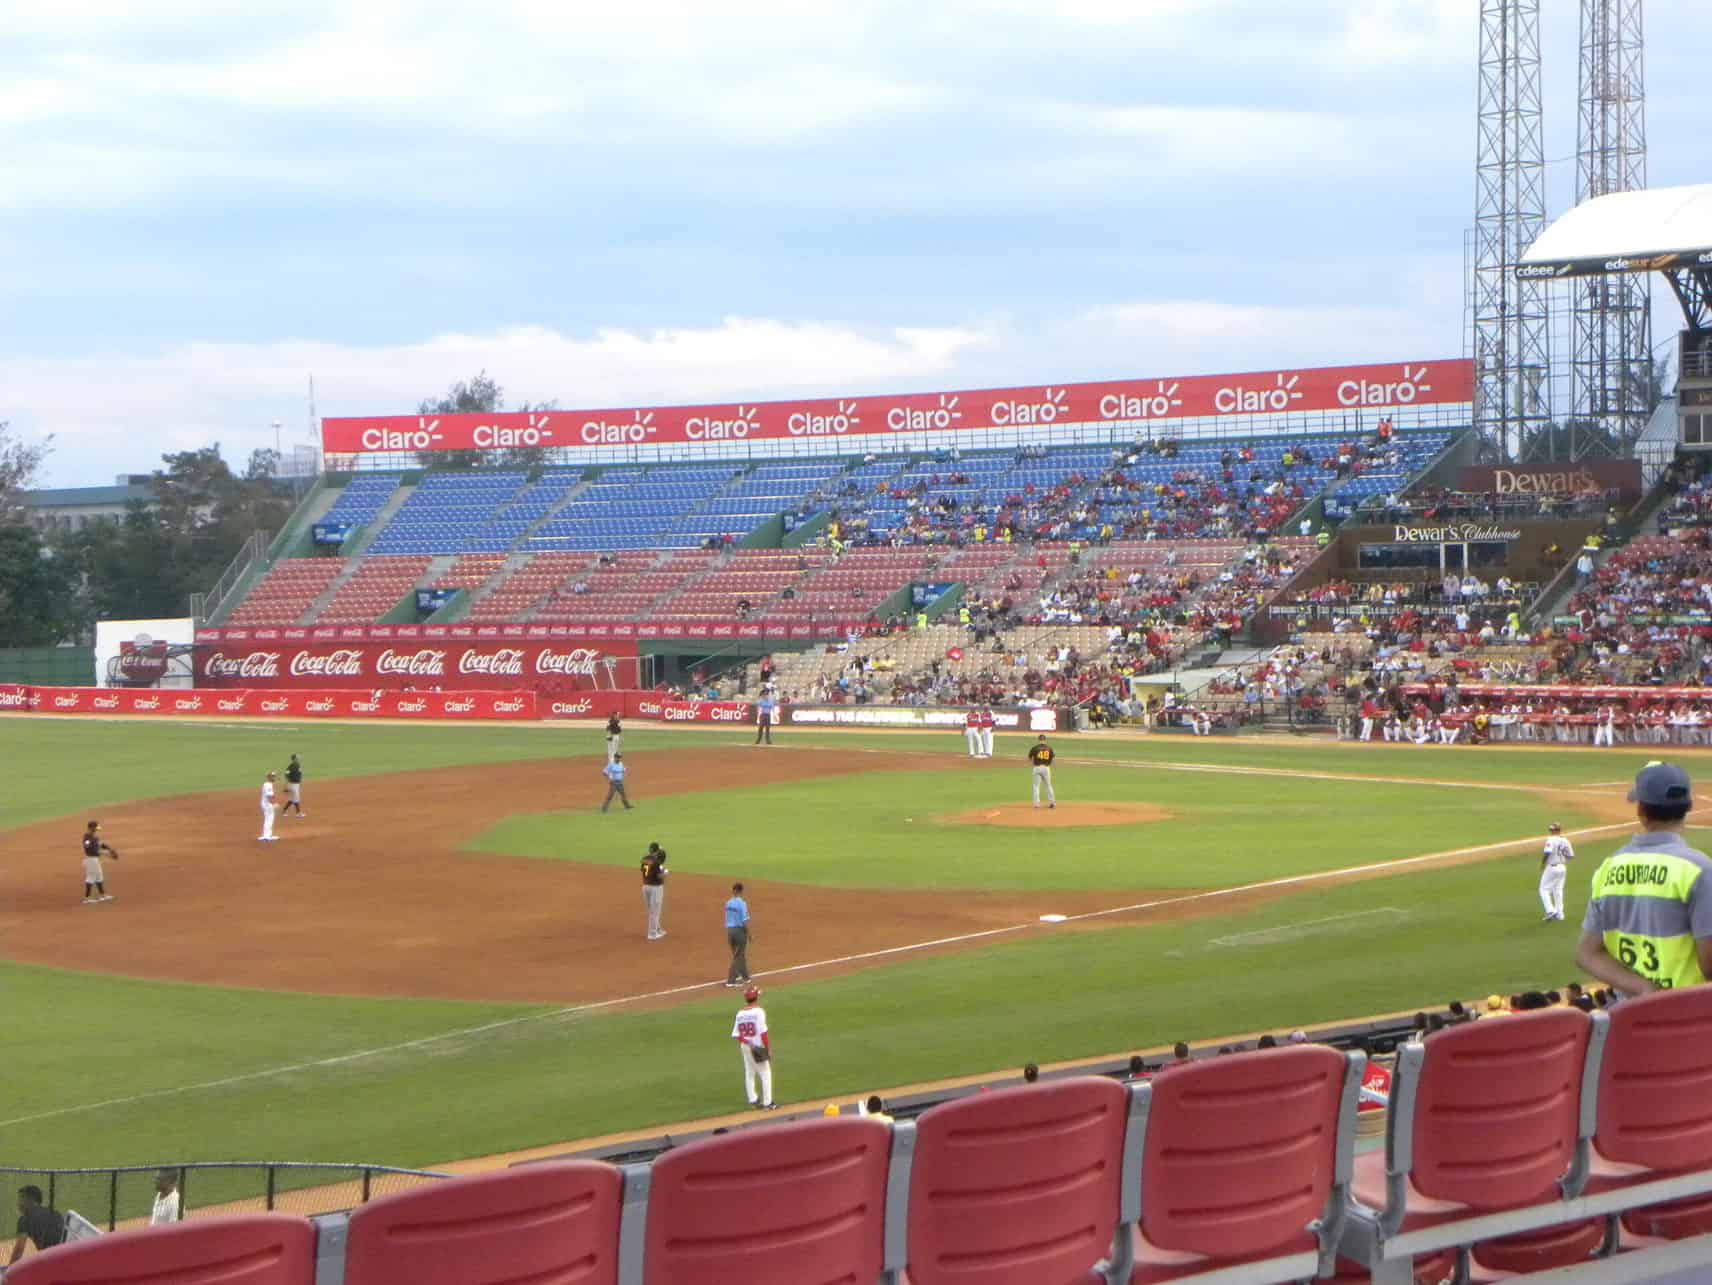 Watching baseball in the Dominican Republic is a popular activity for visitors